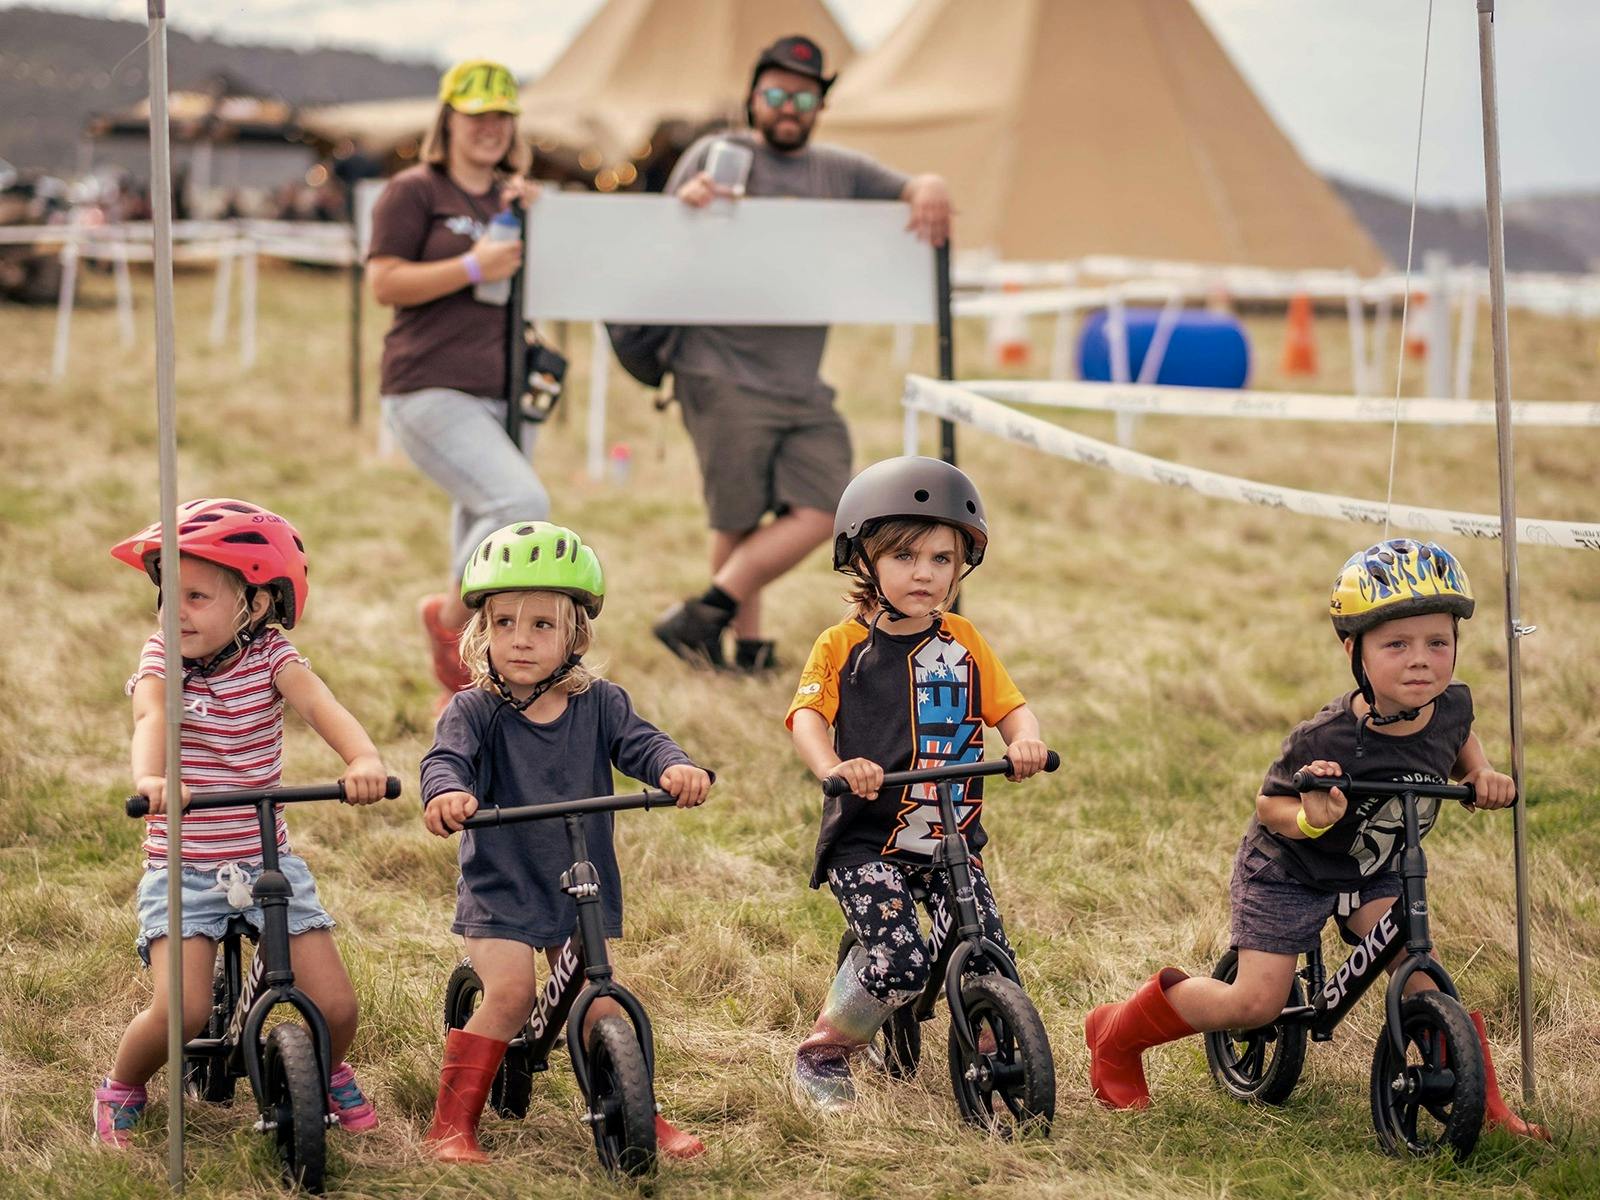 Fun for the whole family with the kids balance bike races.